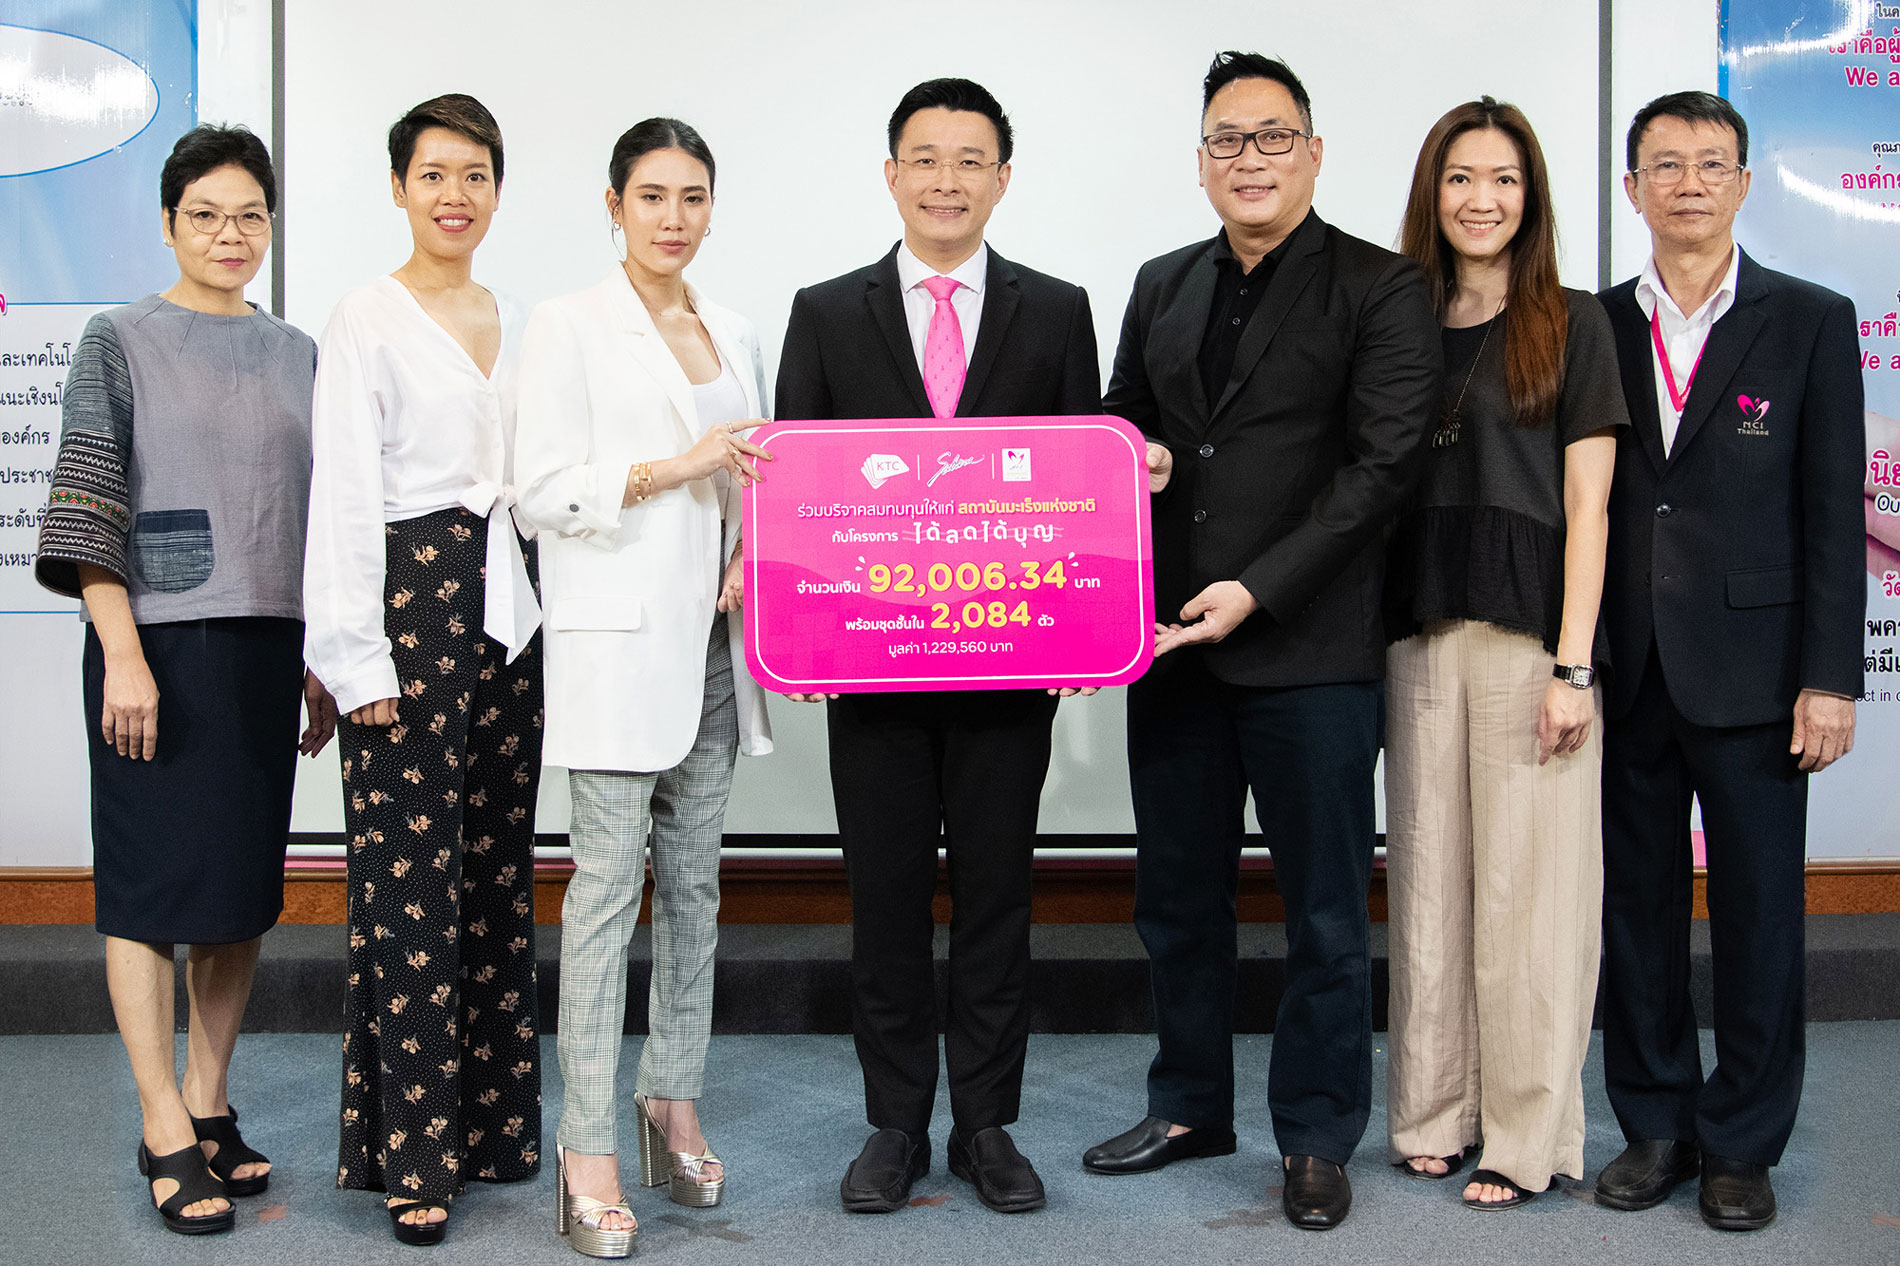 Photo Release: KTC jointly with Sabina hand over donation money and lingerie to the National Cancer Institute.